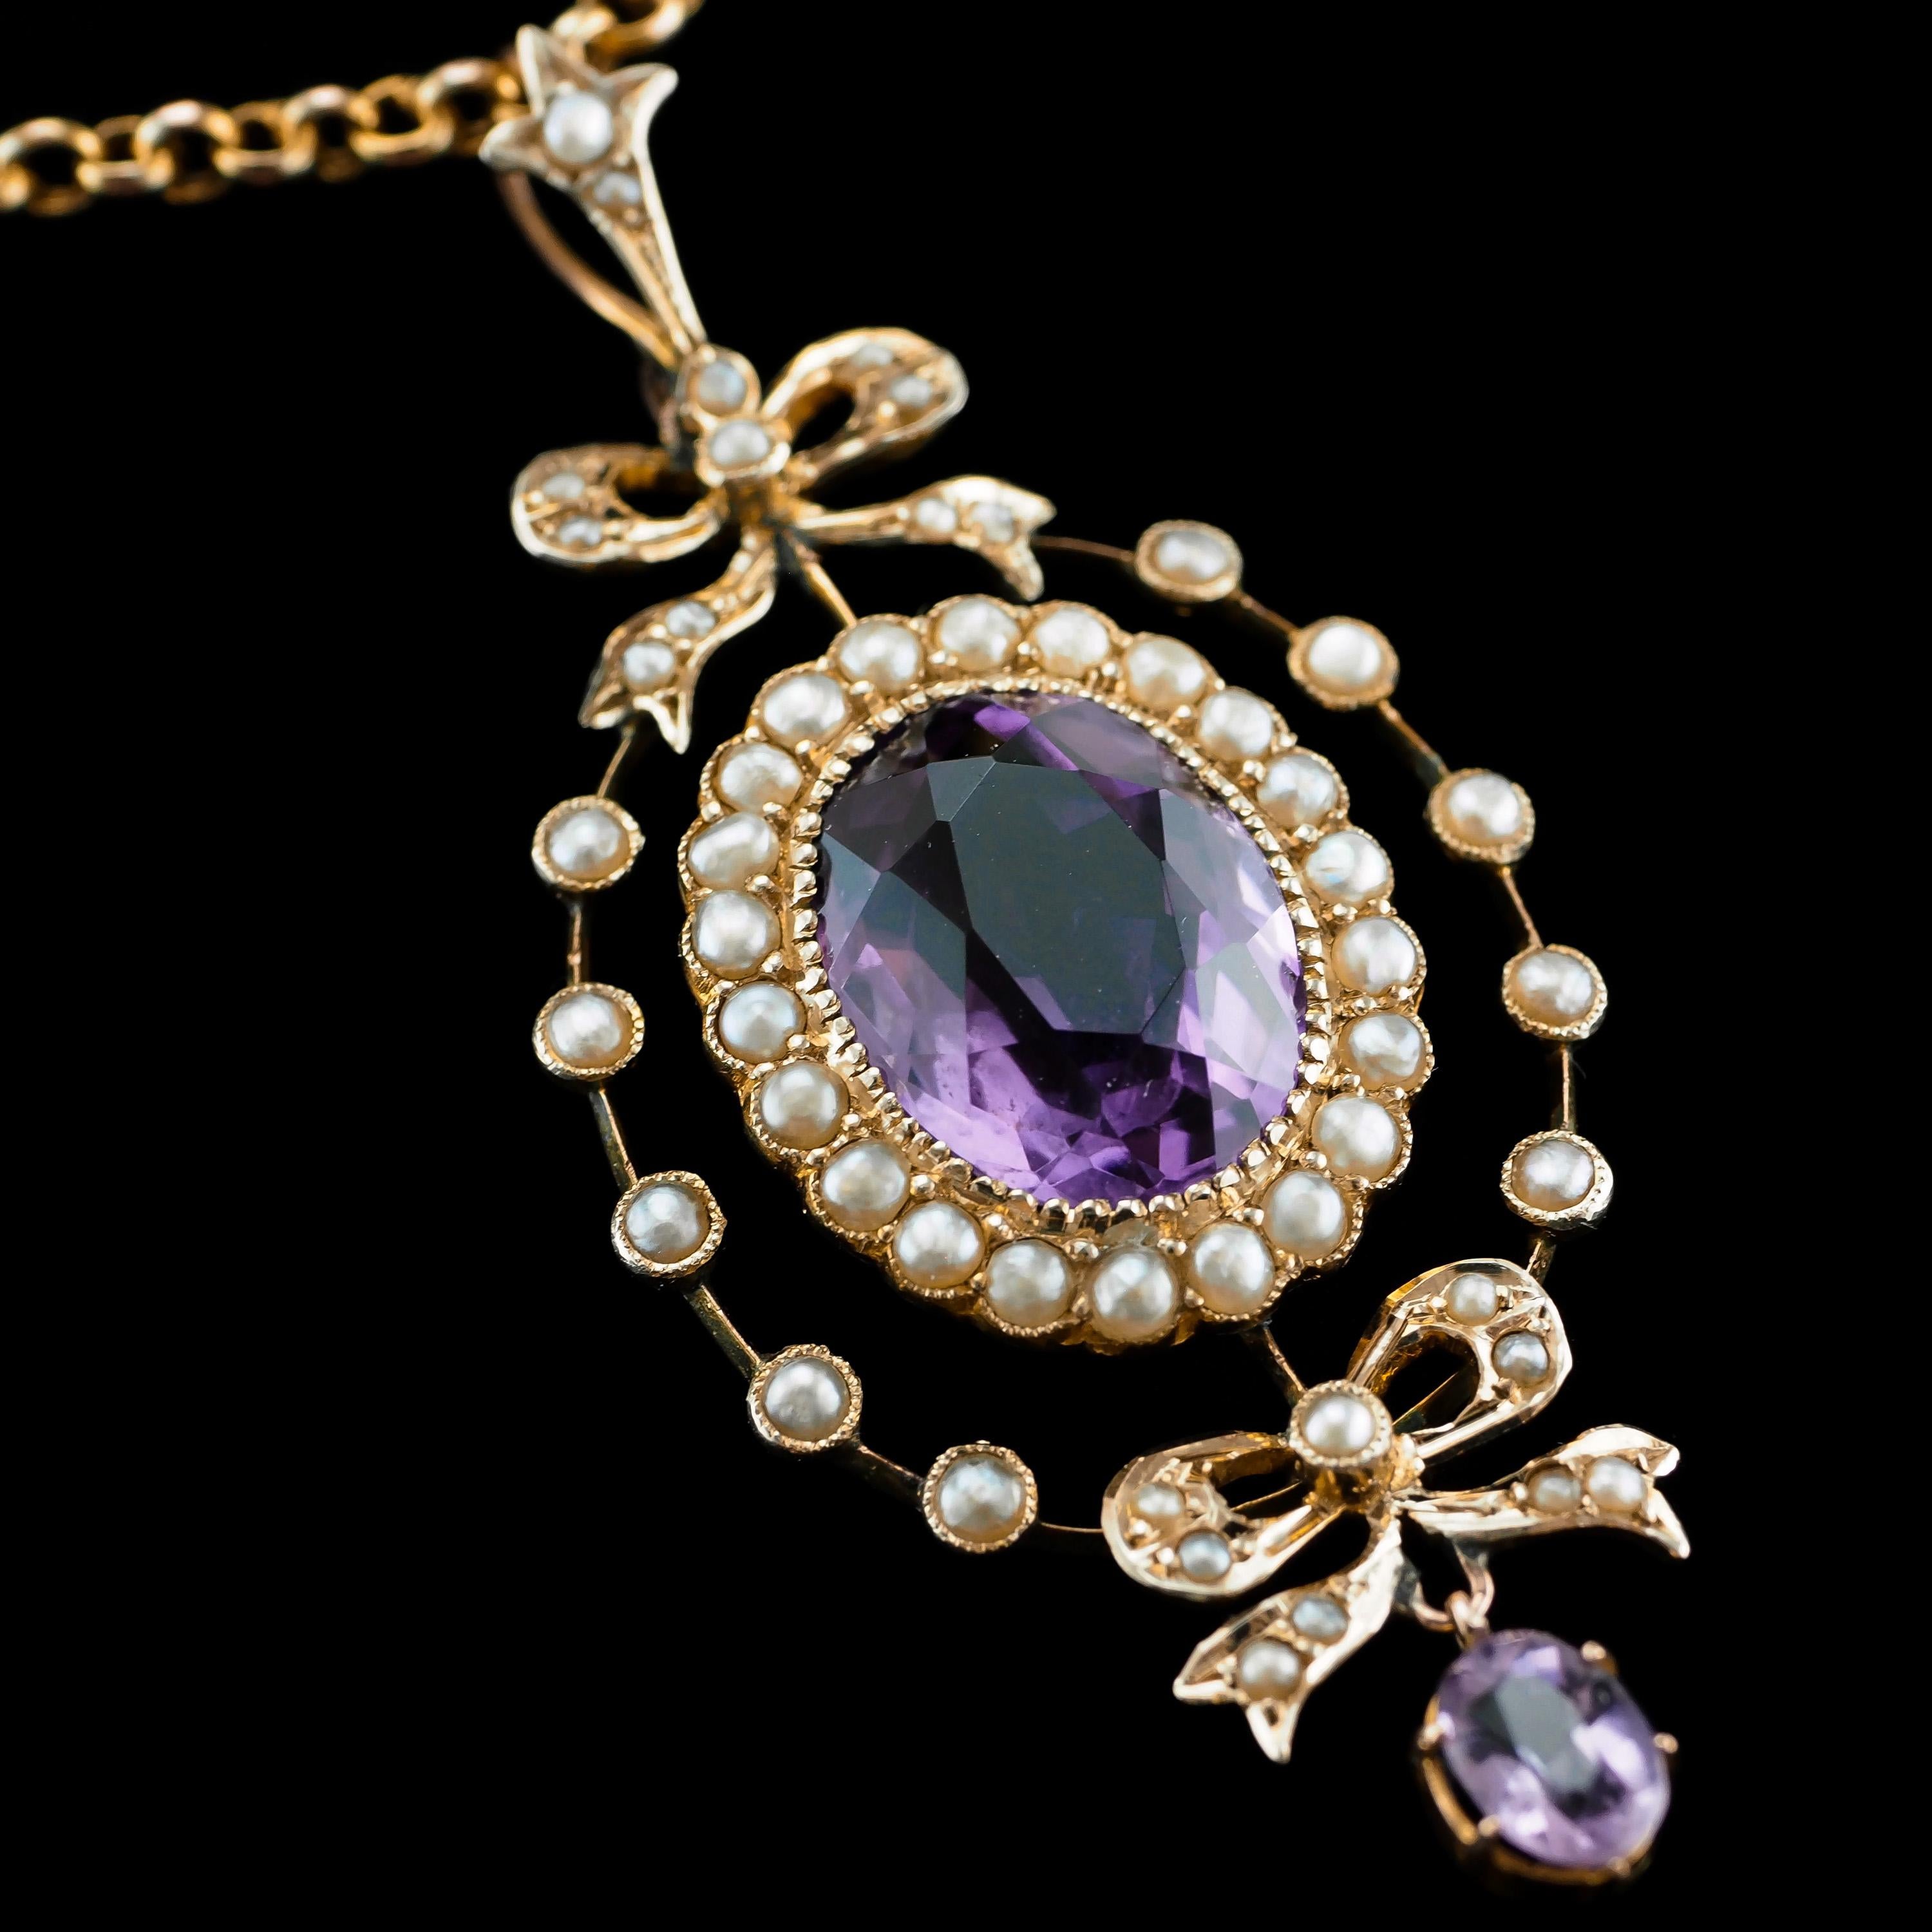 Antique Edwardian Amethyst & Seed Pearl 9k Gold Necklace Pendant, circa 1905 9